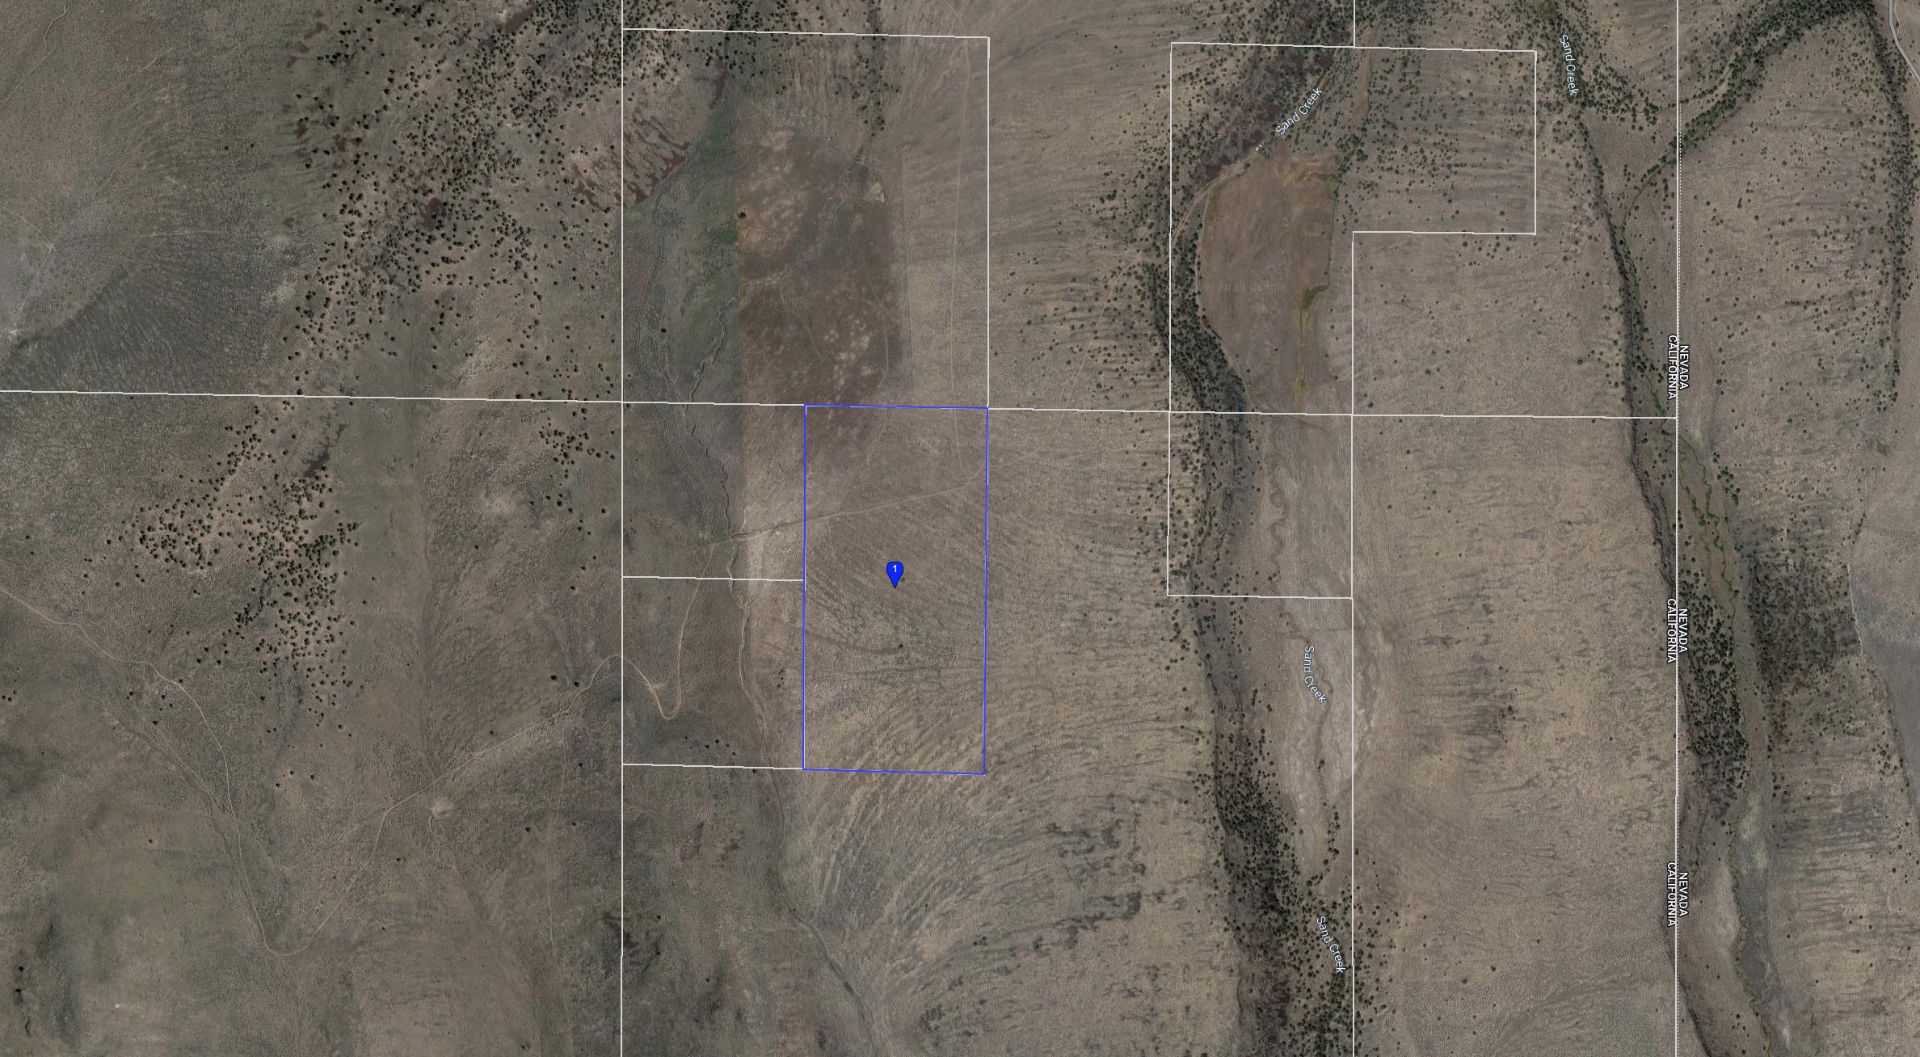 80 Acres in Northern California Near the Nevada Border! - Image 3 of 15